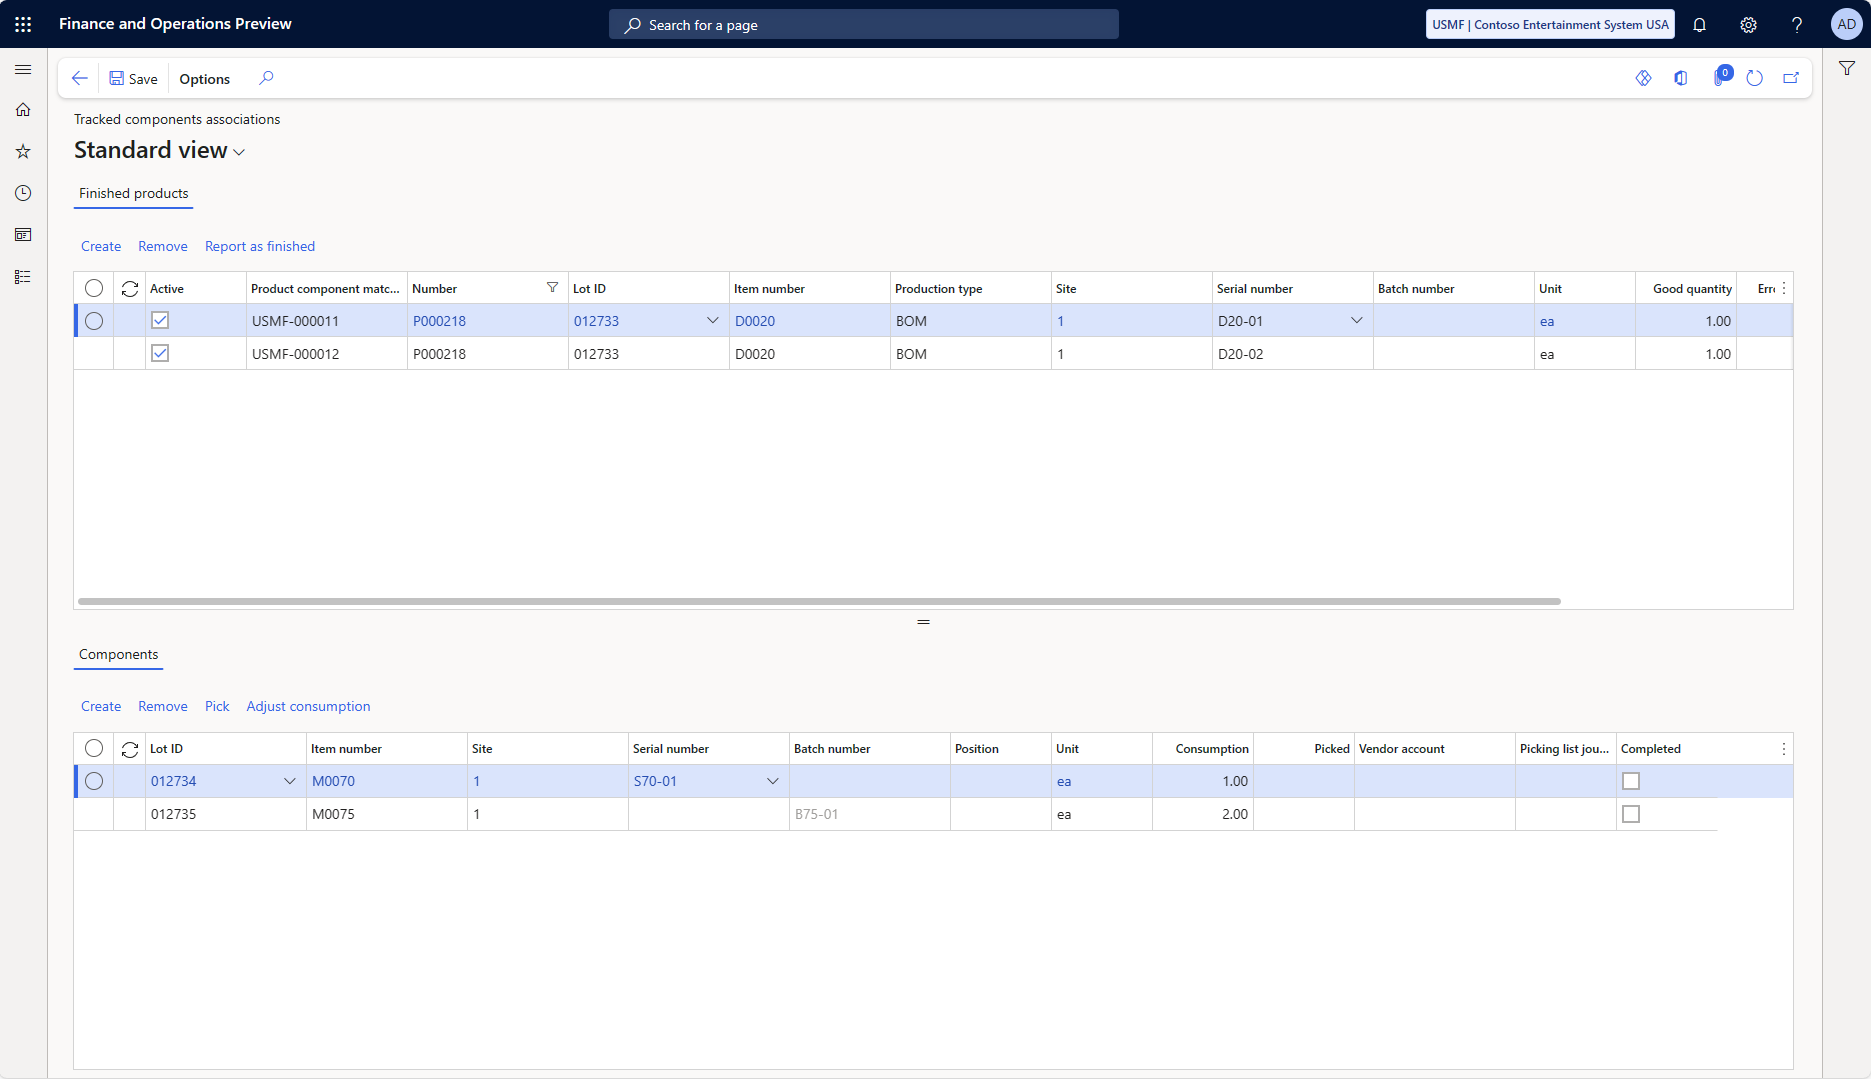 Screenshot of the Tracked components associations page.